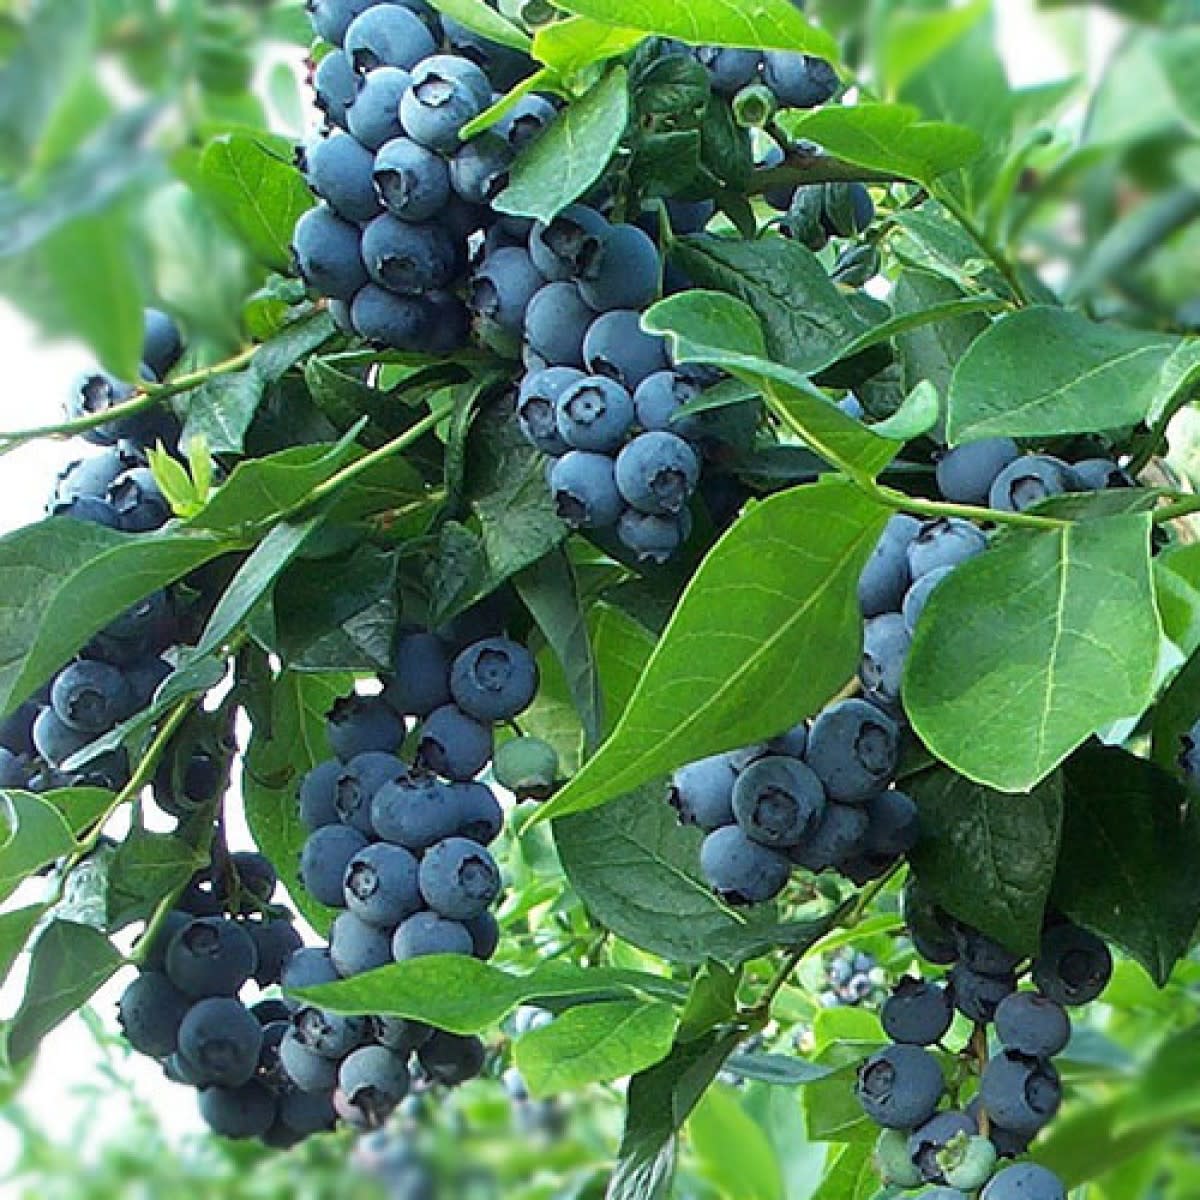 Cultivating Blueberries From Softwood or Hardwood Cuttings